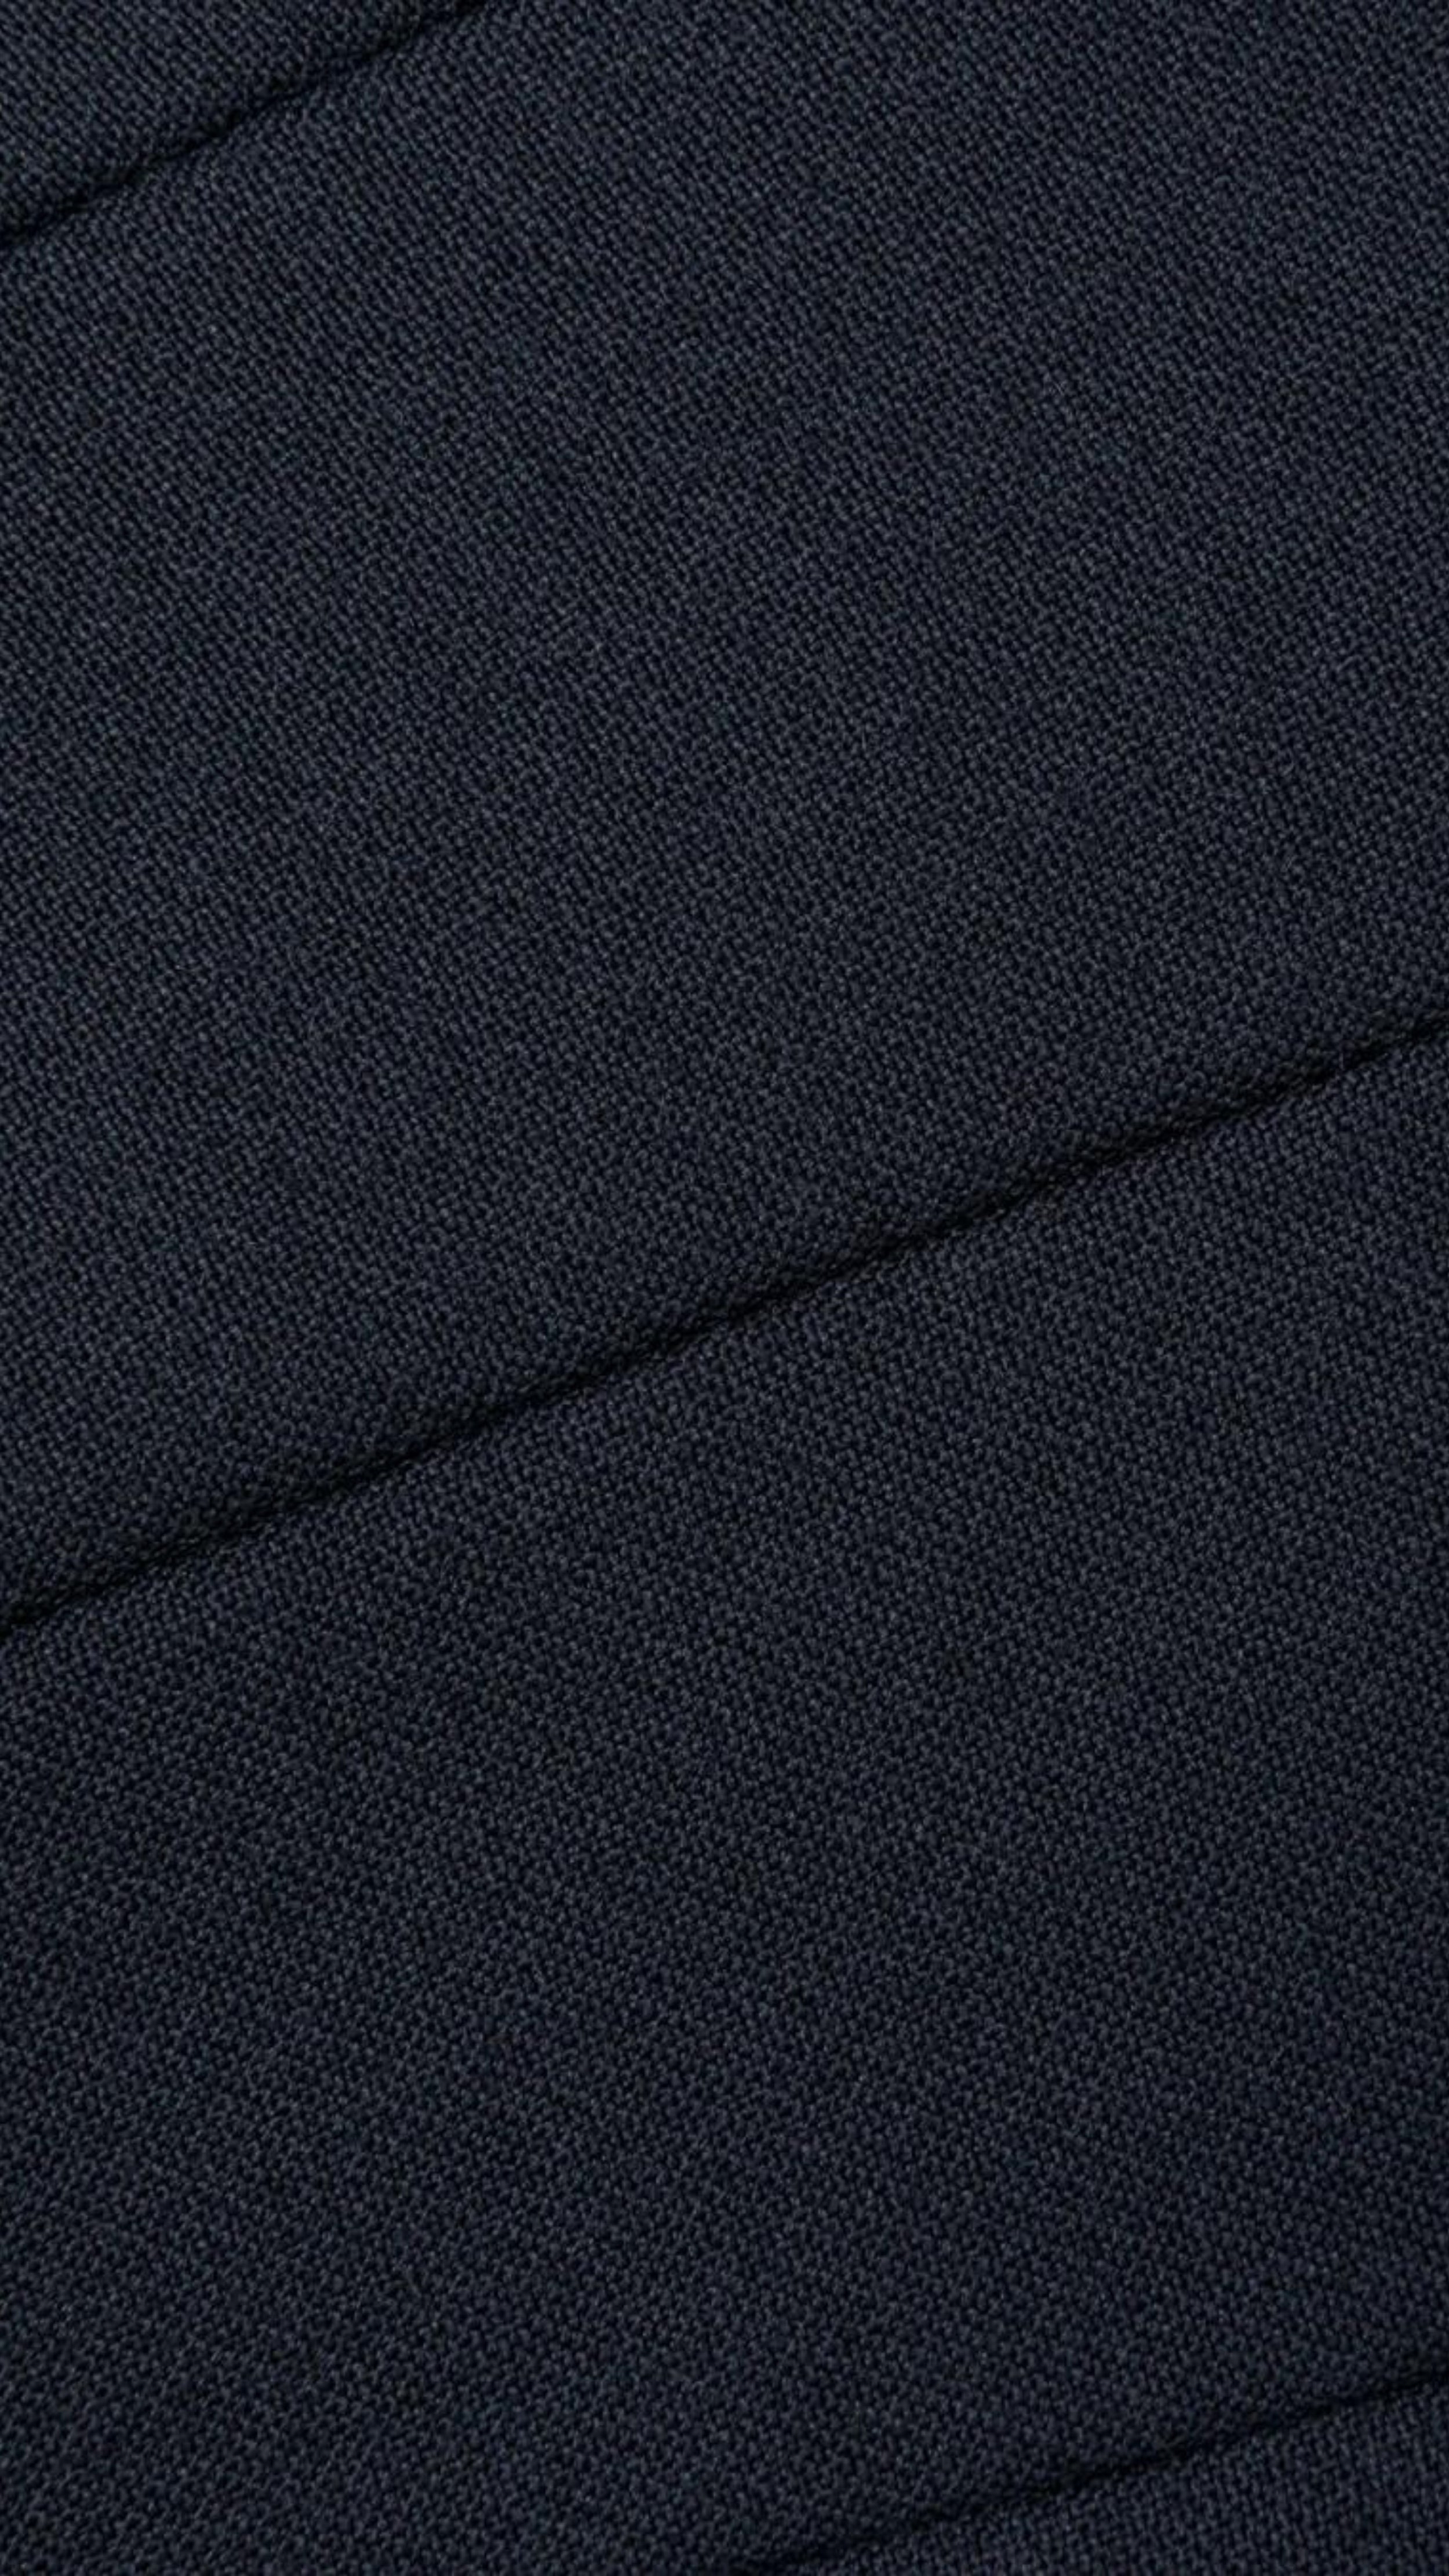 AZ Factory Colville Molly Molloy Lucinda Chambers, Draped Wool Coat in Navy. Wrap around wool coat made in Italy in navy blue. It has an ecru lining and can be worn open or belted for a more fitted style. Close up of fabric.